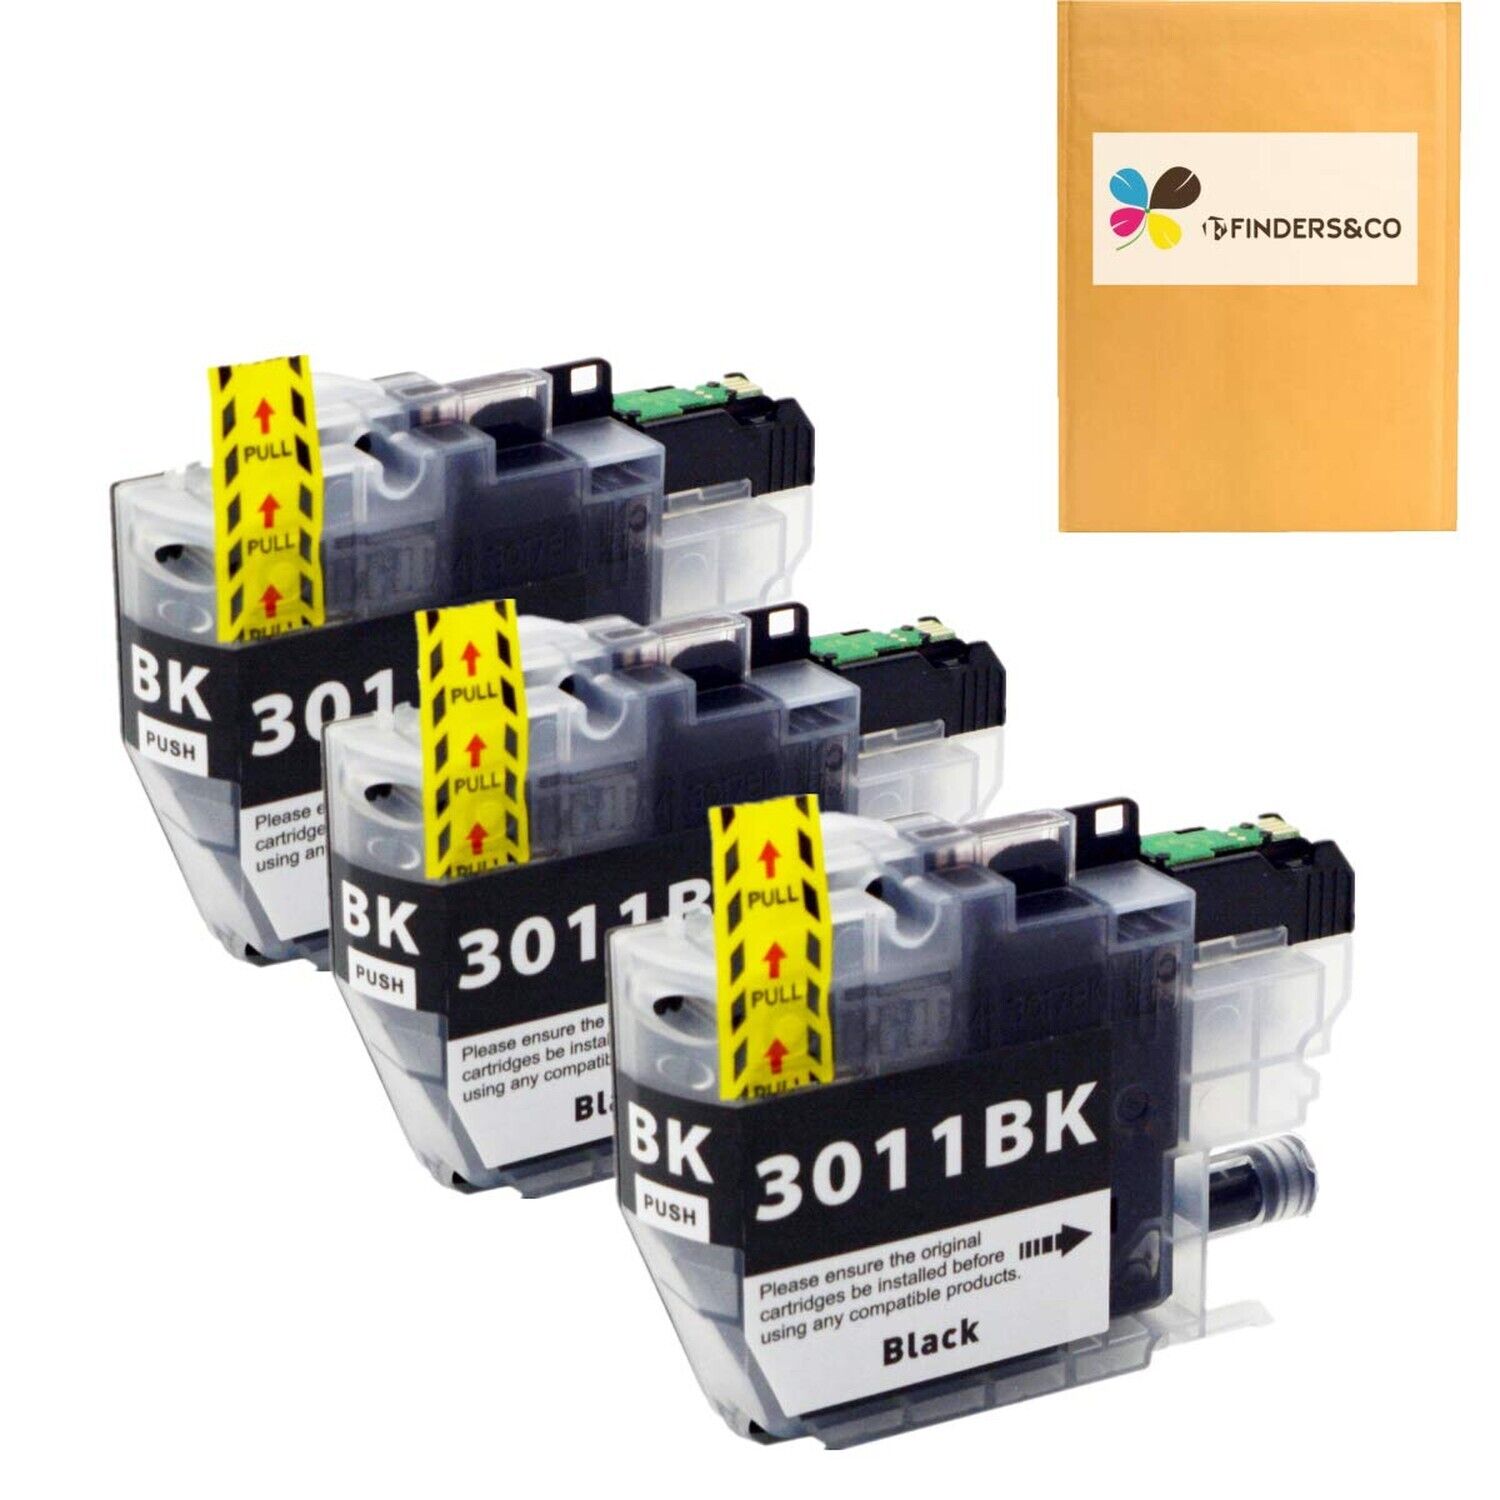 F FINDERS&CO LC3011BK Compatible Ink Cartridge Replacement for Brother LC3011...